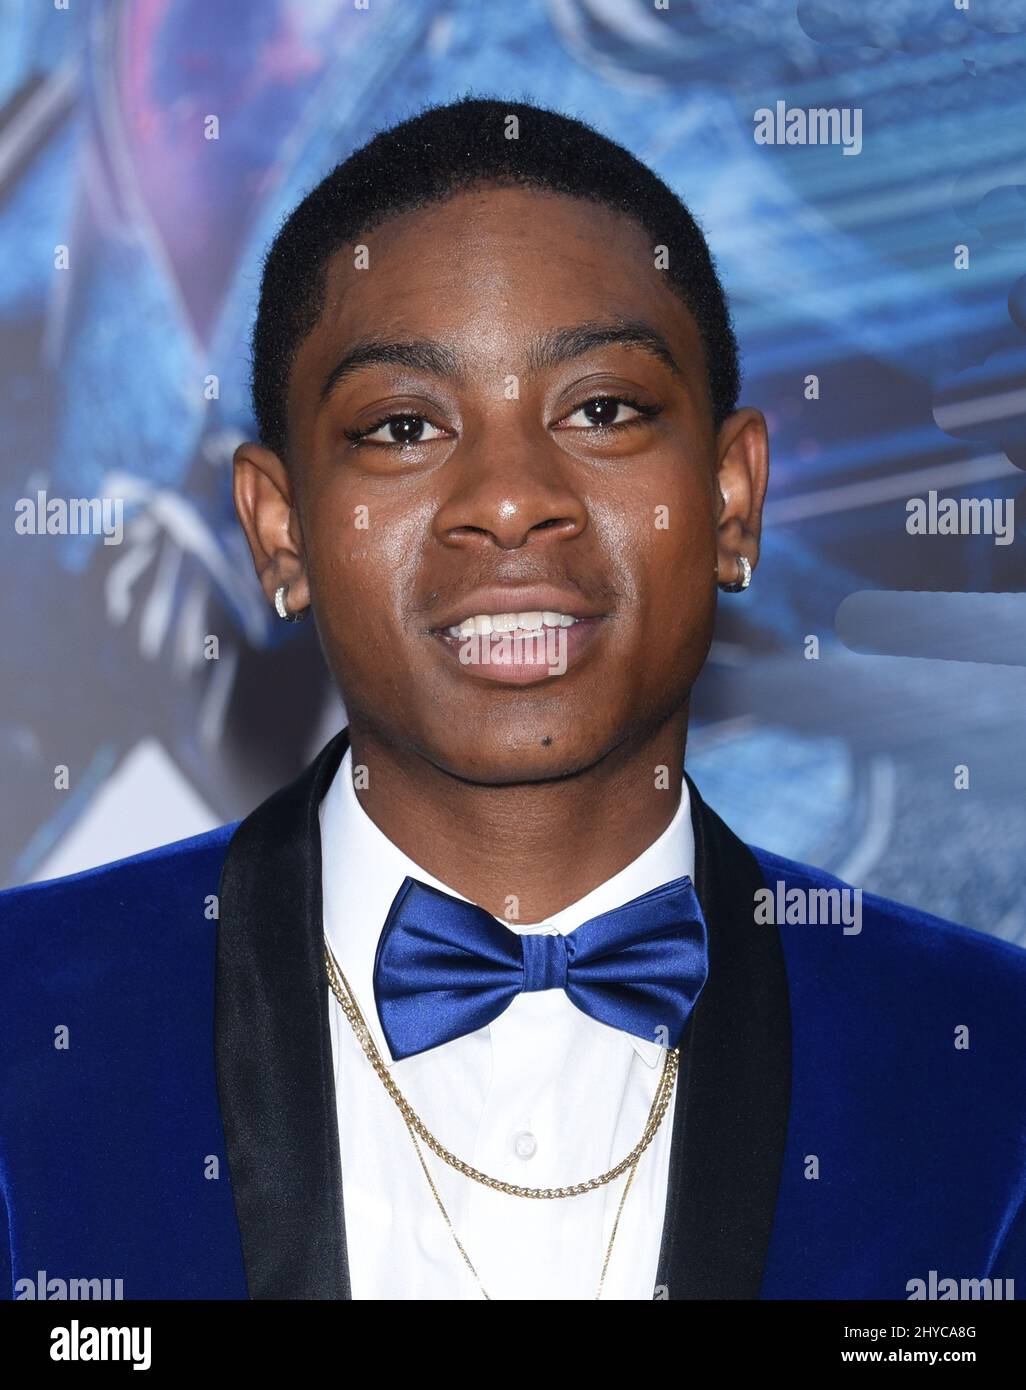 RJ Cyler attending the 'Saban's Power Rangers' World Premiere held at the Regency Village Theatre Stock Photo